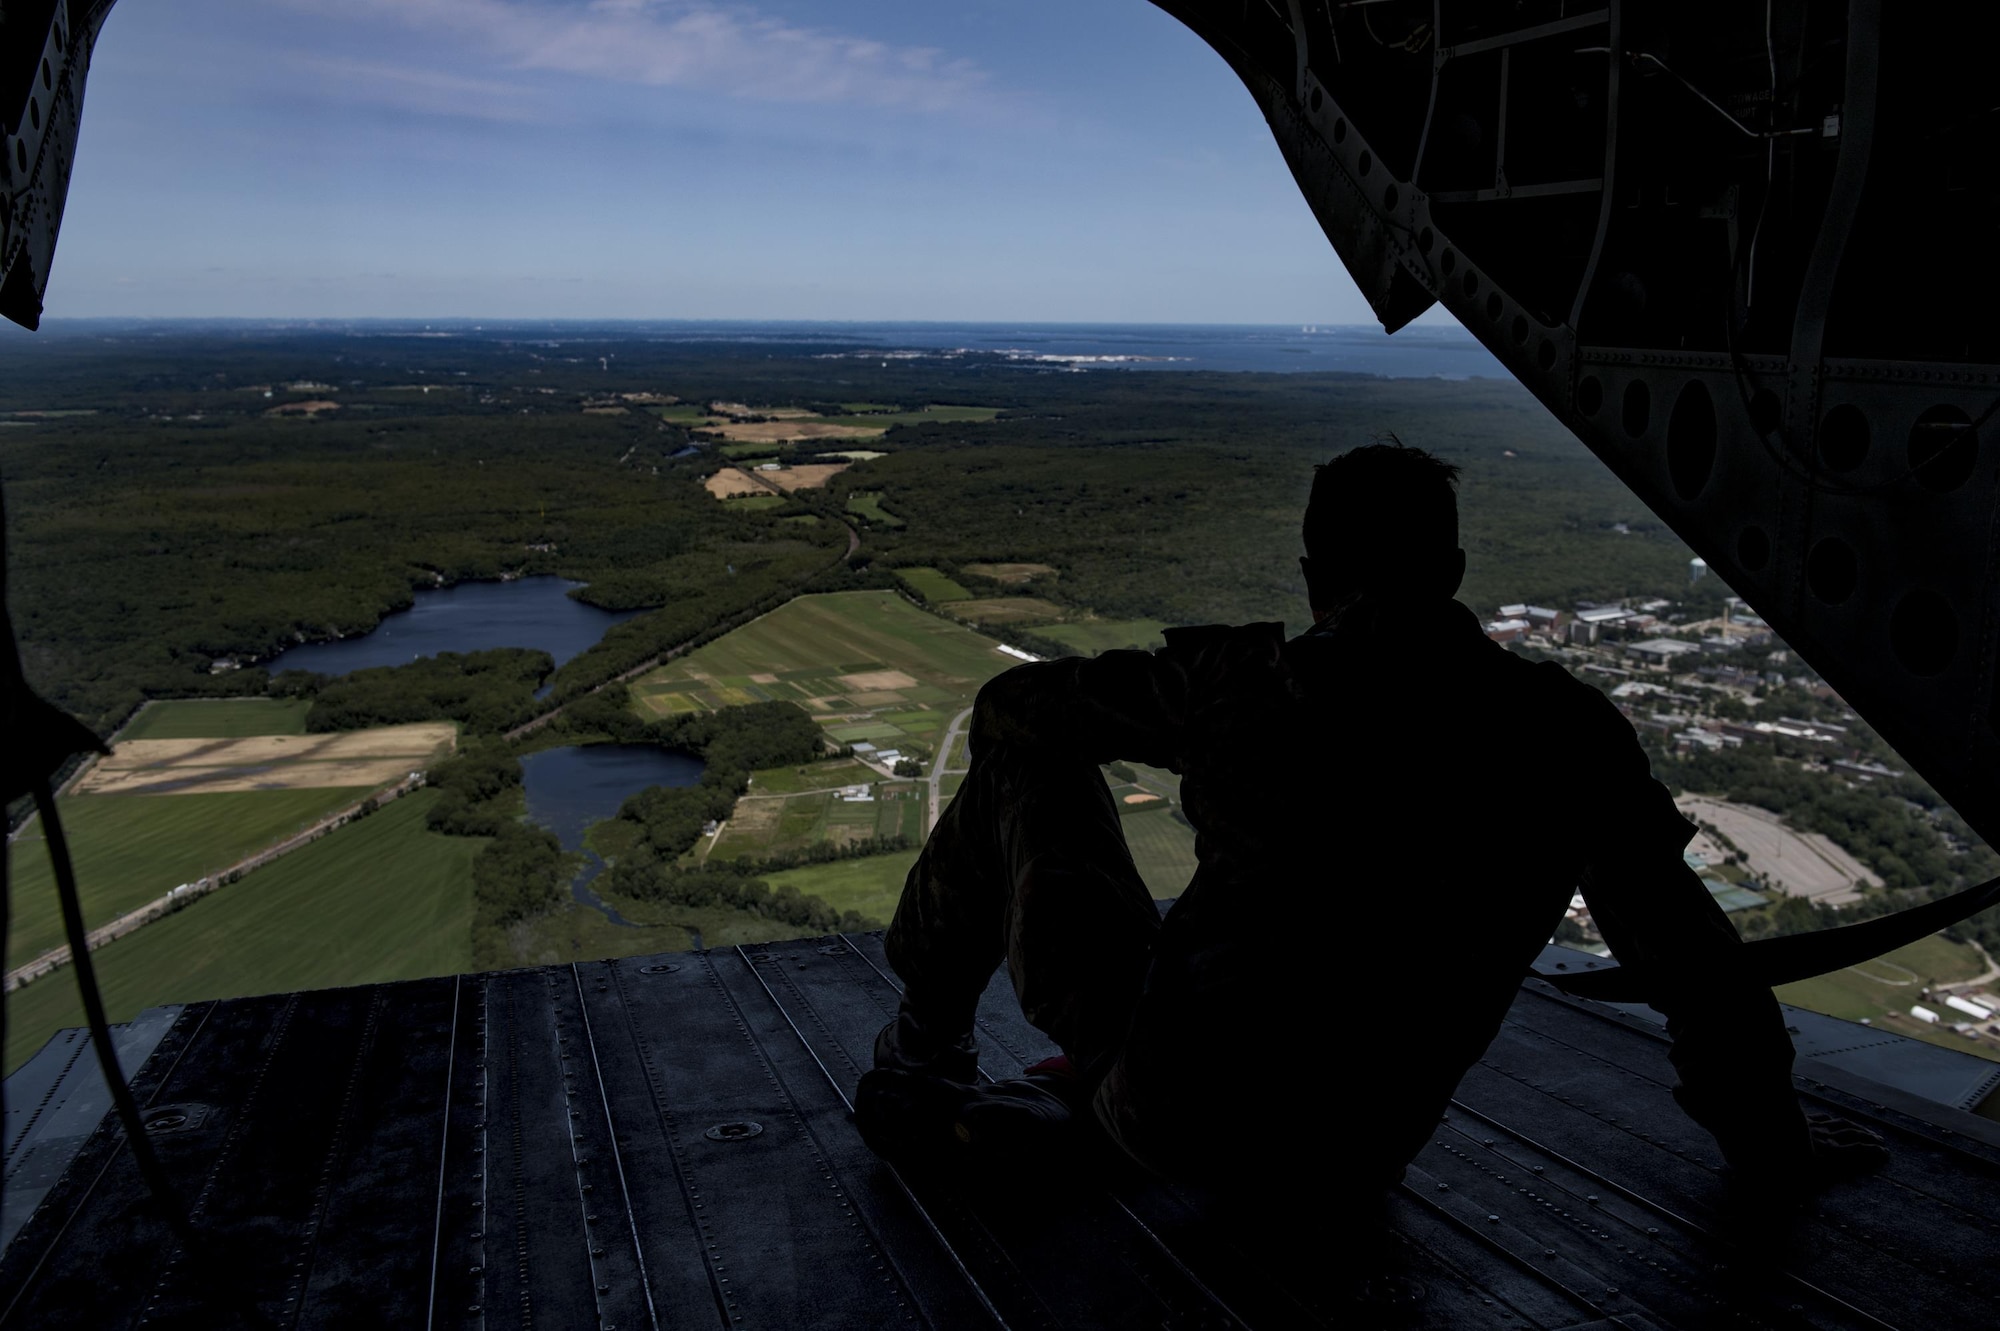 Italian army Lt. Gilberti Pier Luigi, jump master, looks out from the back hatch of a CH-47 Chinook during Leapfest, Aug. 6, 2017, in West Kingstown, RI. The Rhode Island National guard hosted the 34th annual event, which is the largest international static line jump competition in the world. Team Moody’s Airmen represented the only U.S. sister-service team and earned second place among 70 participating teams. (U.S. Air Force photo by Air-man 1st Class Daniel Snider)